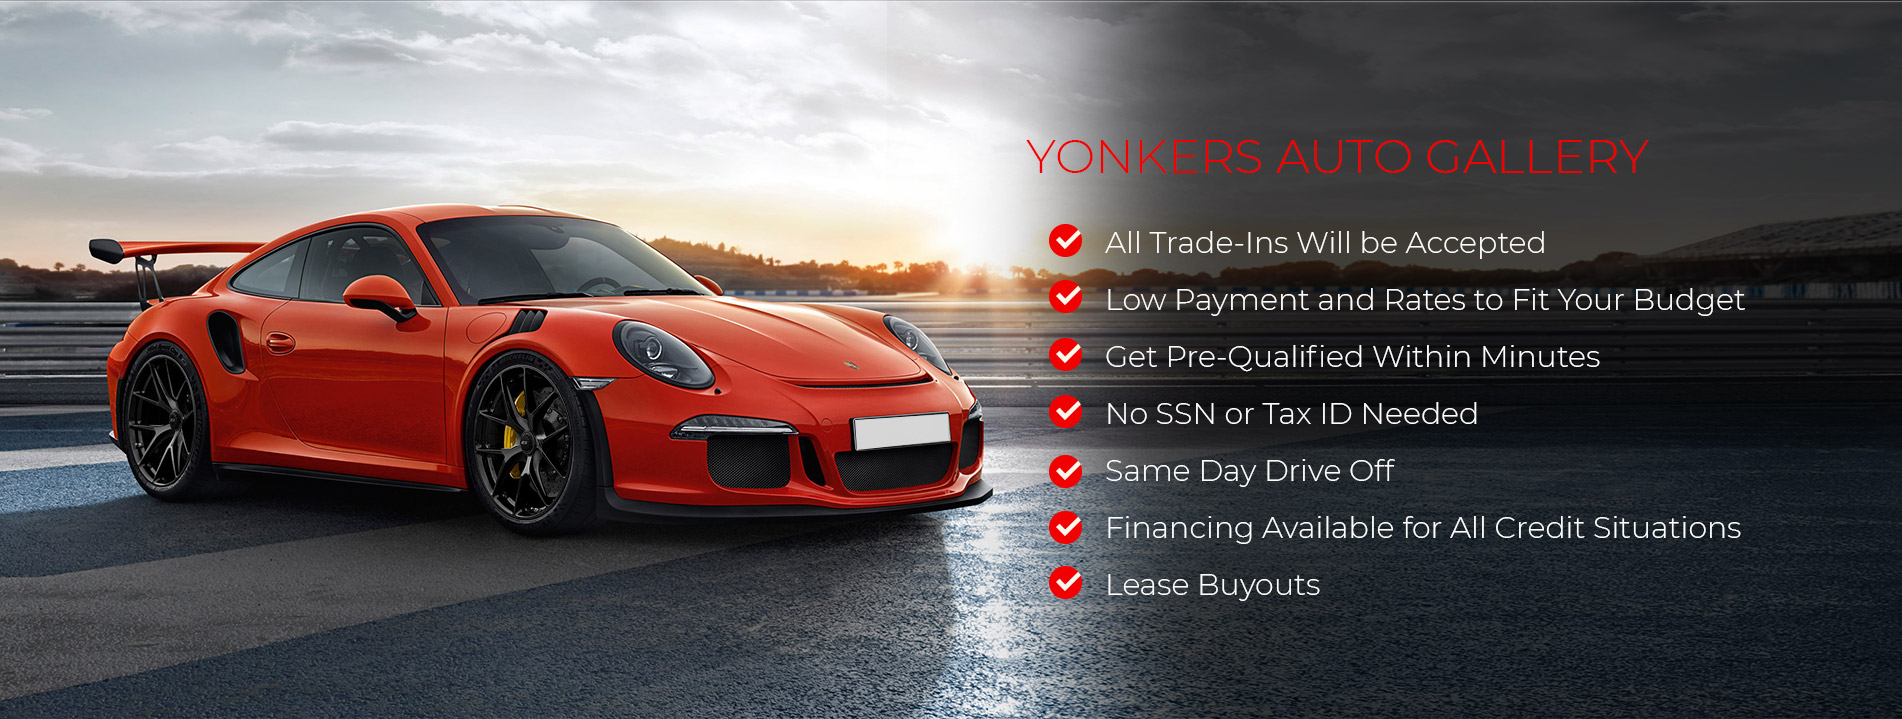 Used cars for sale in Yonkers | Yonkers Auto Gallery LLC. Yonkers New York